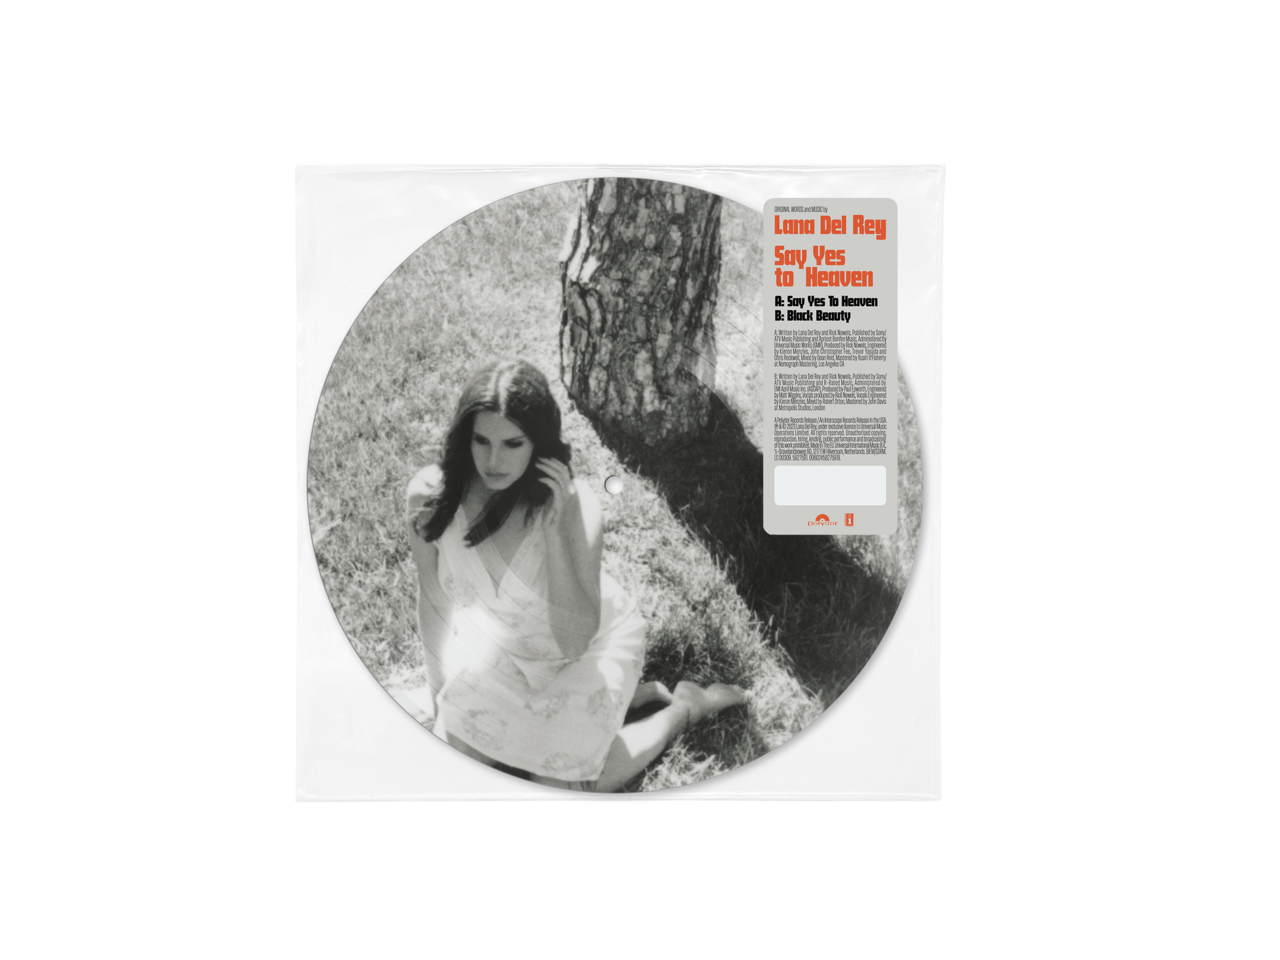 Lana Del Rey - Limited Edition Say Yes To Heaven 7" Single Picture Disc